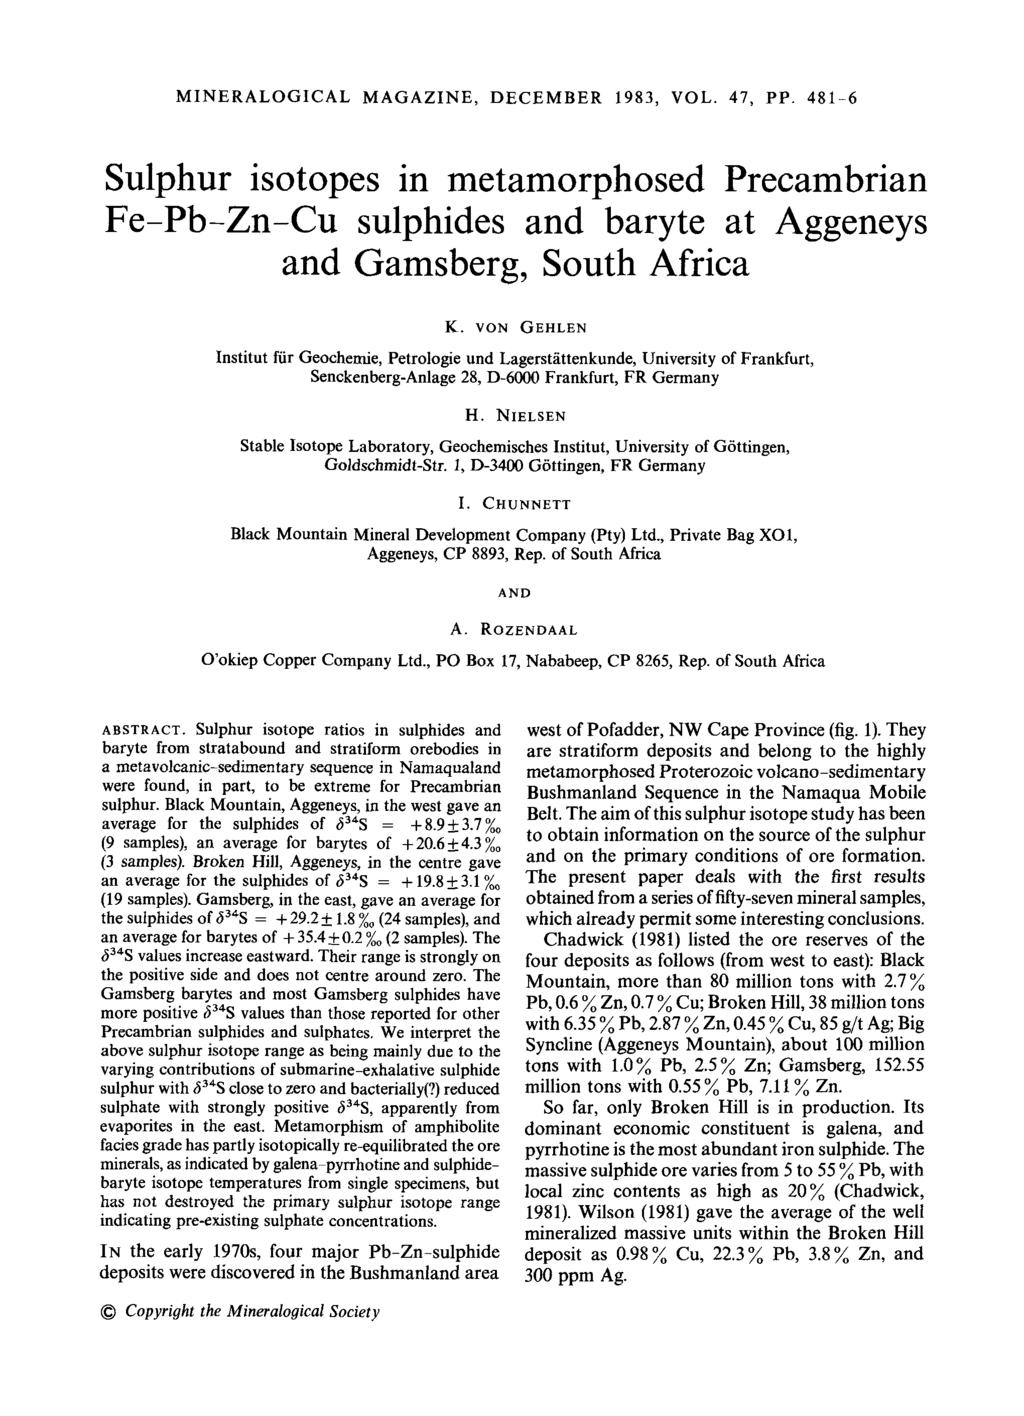 MINERALOGICAL MAGAZINE, DECEMBER 1983, VOL. 47, PP. 481-6 Sulphur isotopes in metamorphosed Precambrian Fe-Pb-Zn-Cu sulphides and baryte at Aggeneys and Gamsberg, South Africa K.